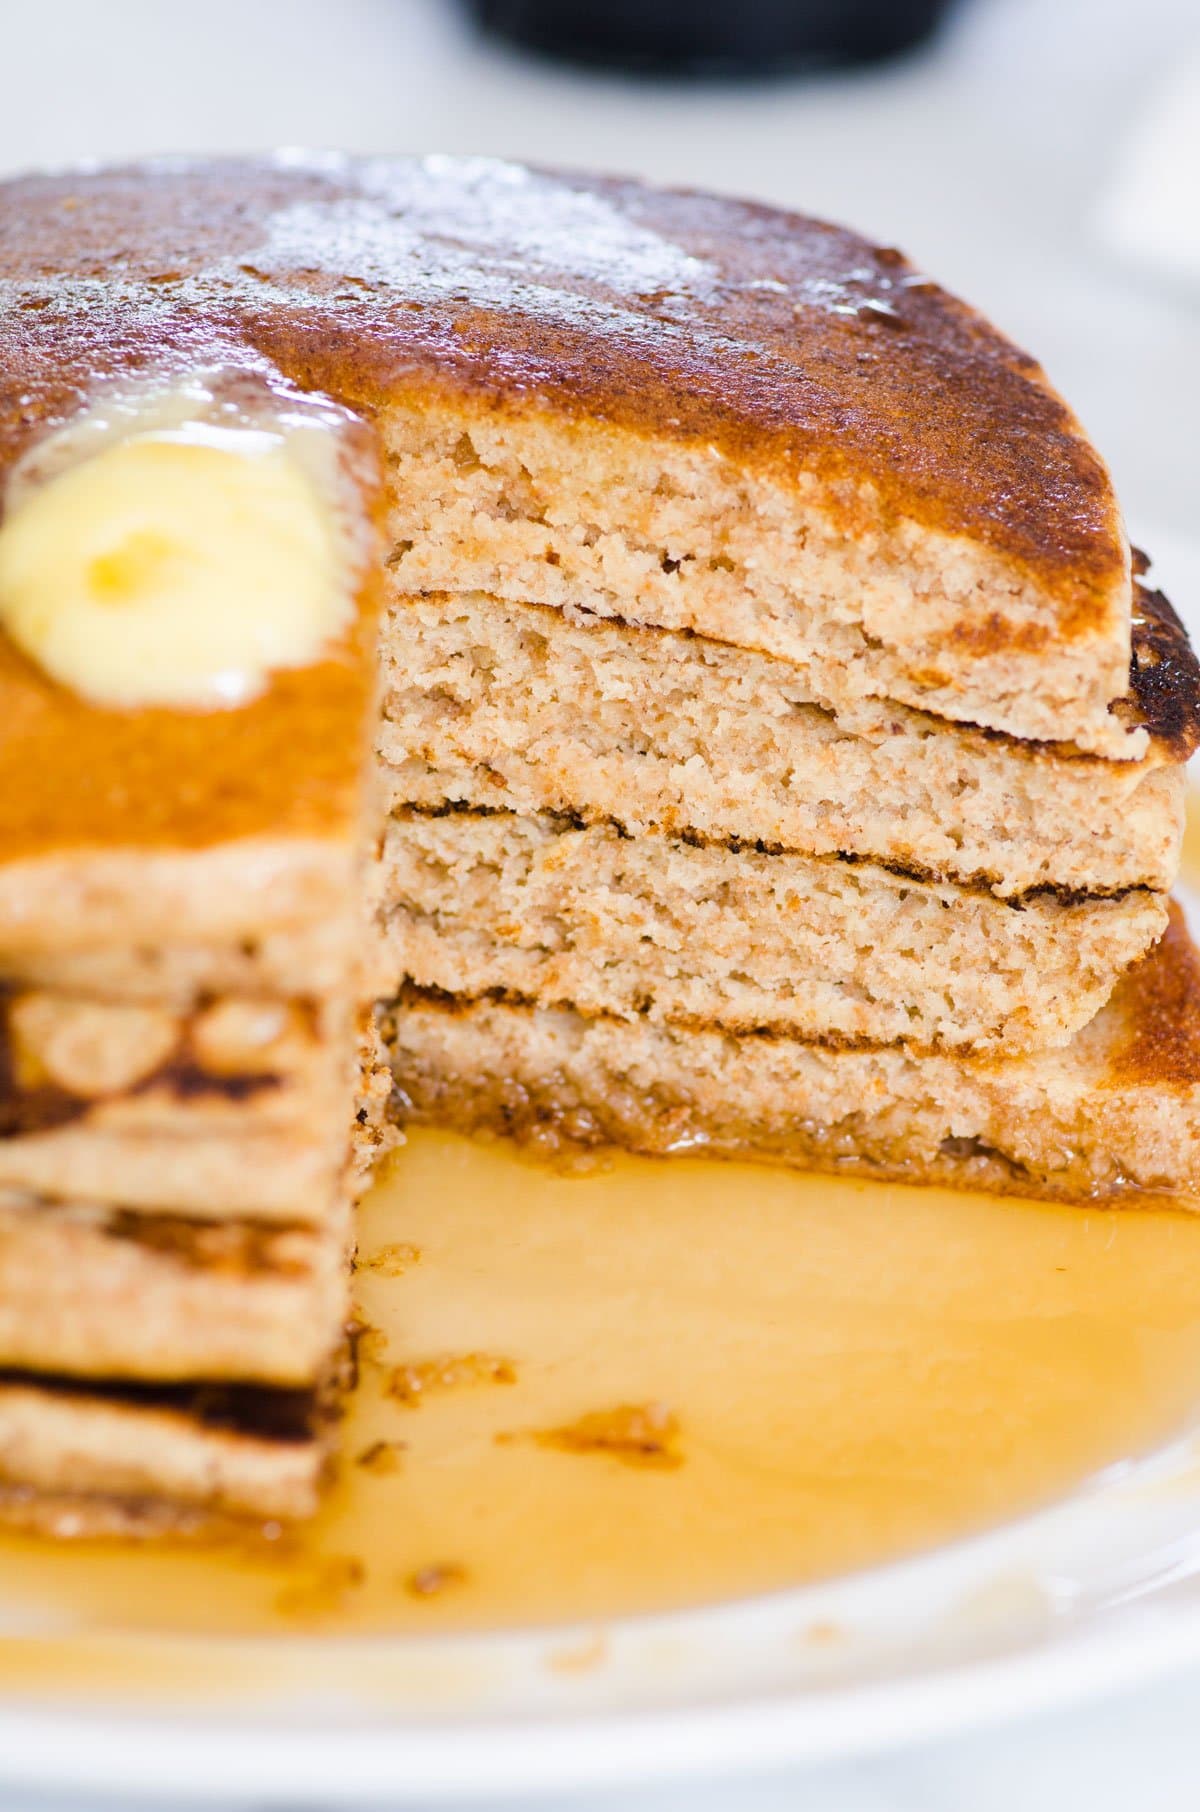 A stack of whole wheat pancakes cut through showing fluffy texture.